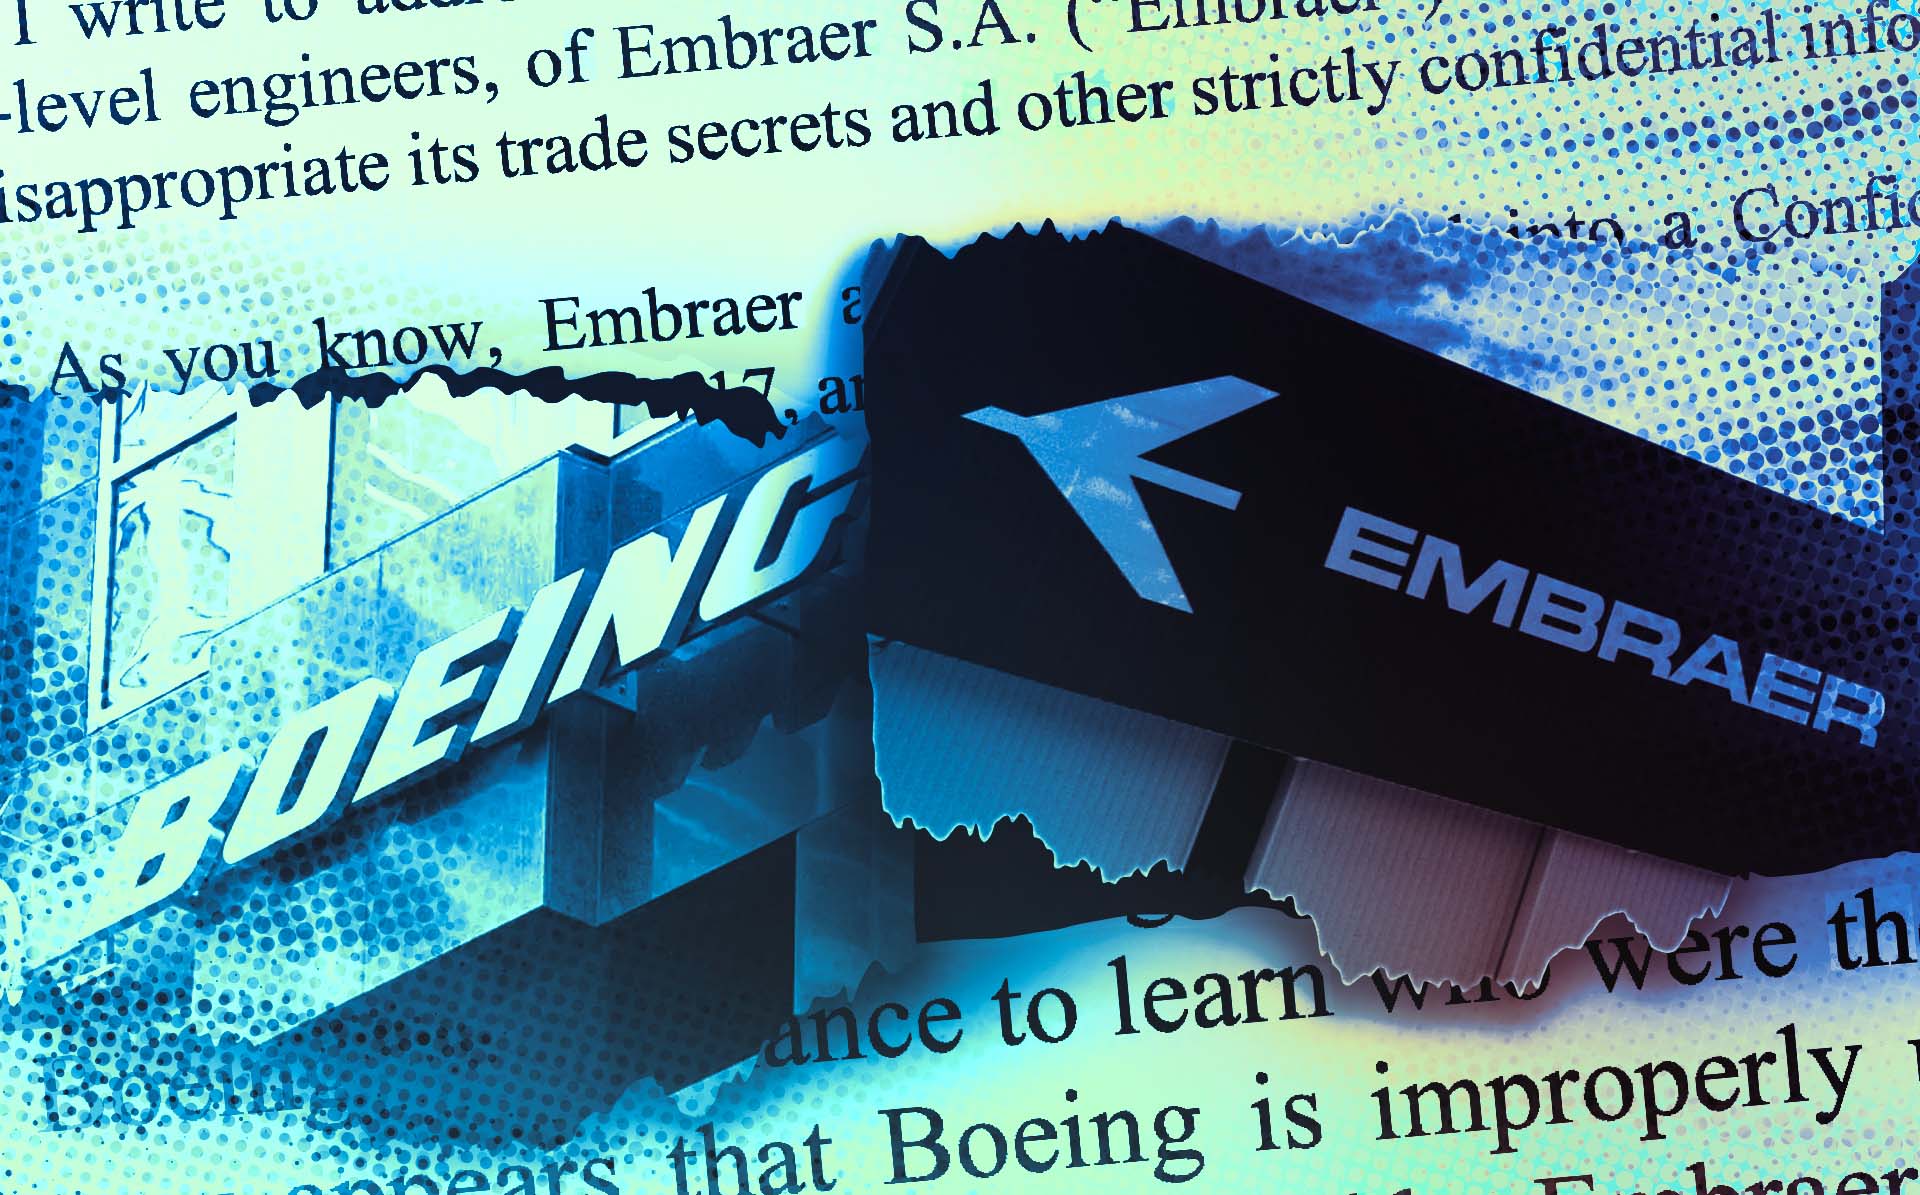 boeing embraer thumb